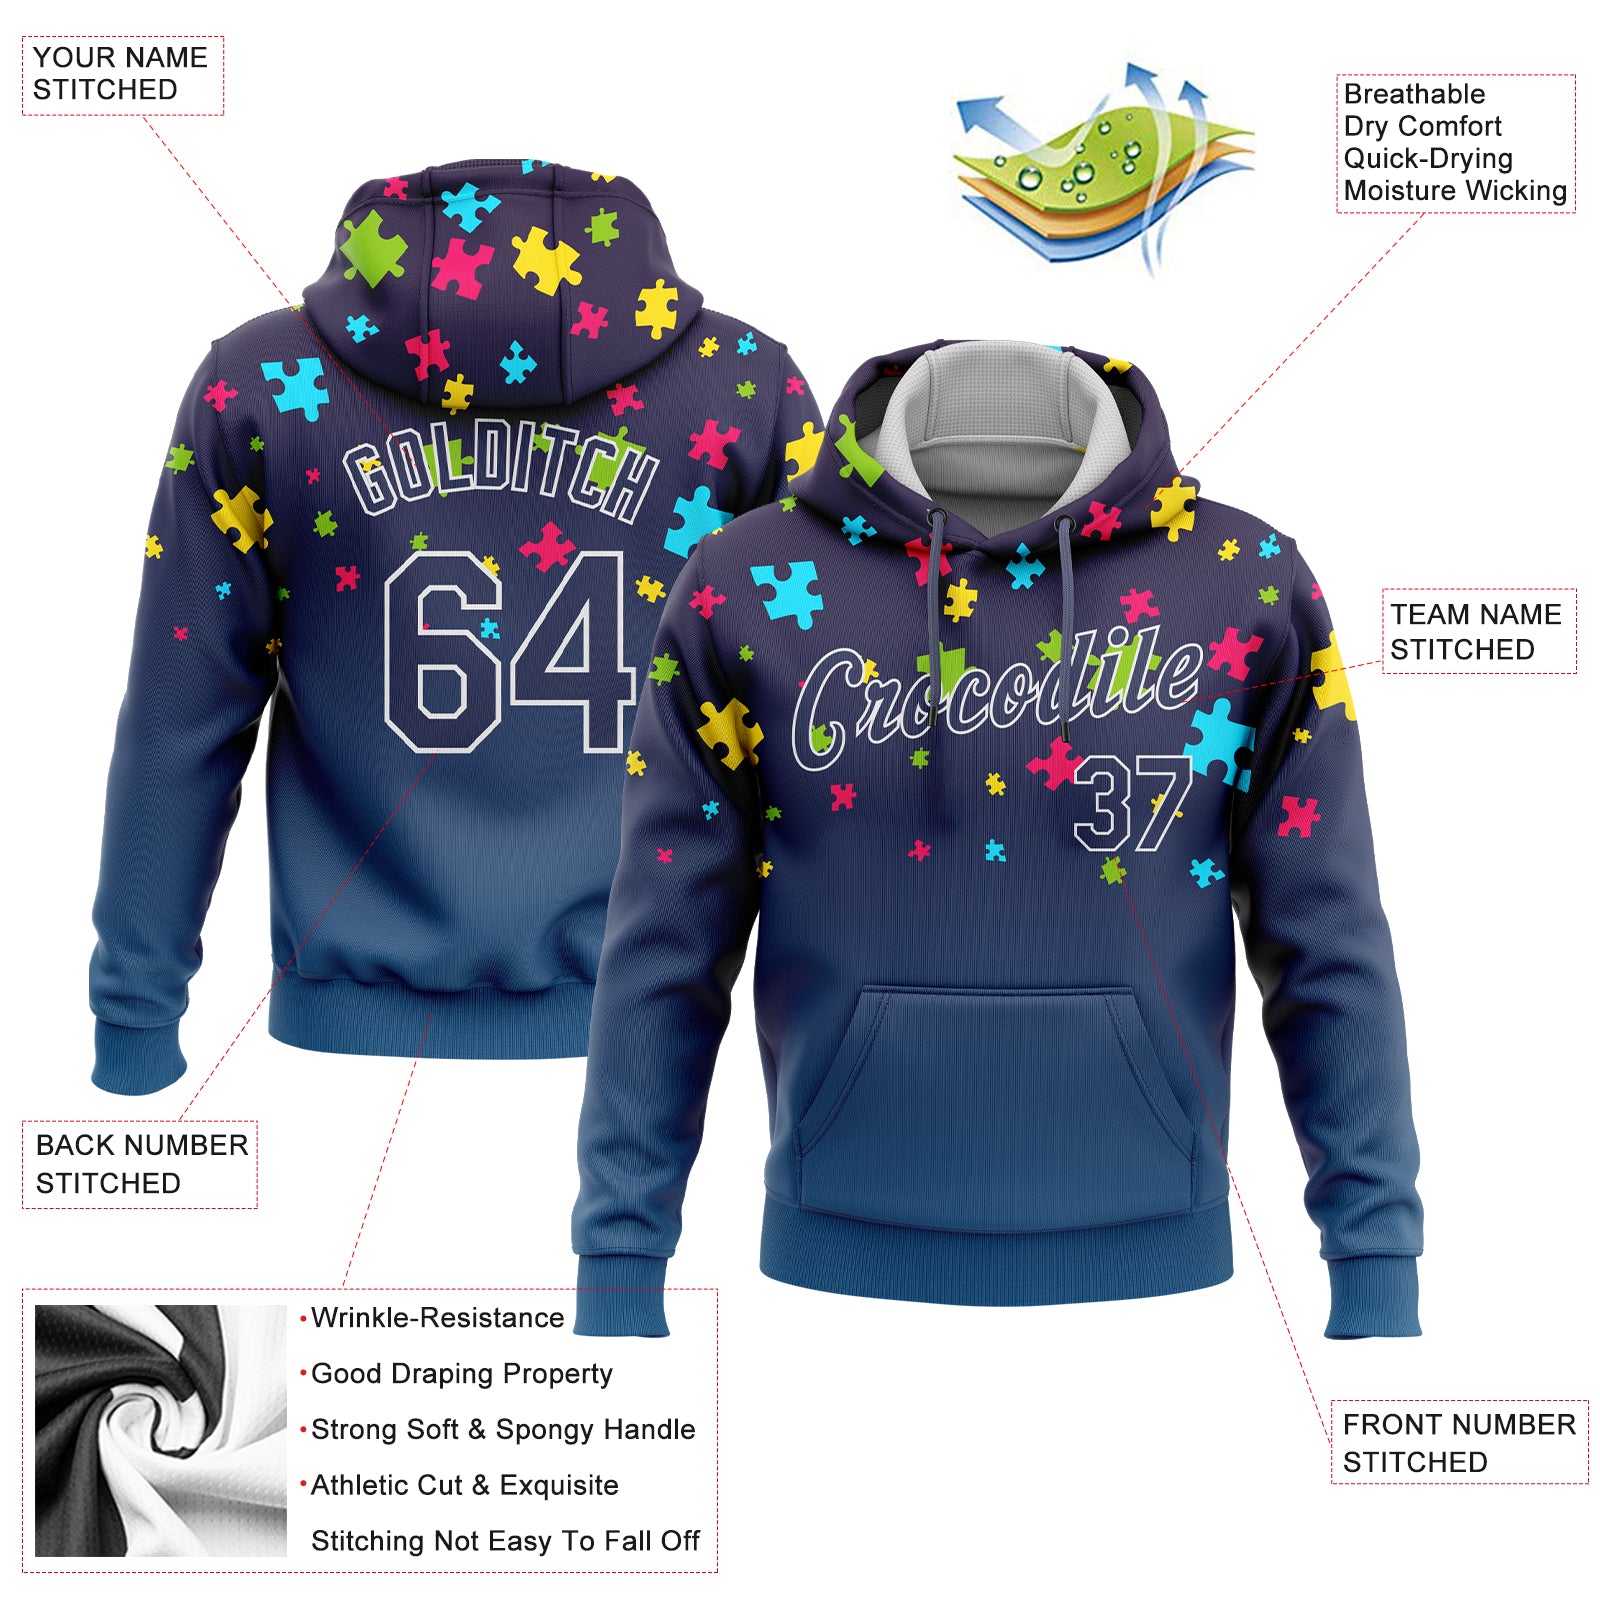 Custom Stitched Autism Awareness Puzzle Pieces Navy-White 3D Pattern Design Sports Pullover Sweatshirt Hoodie